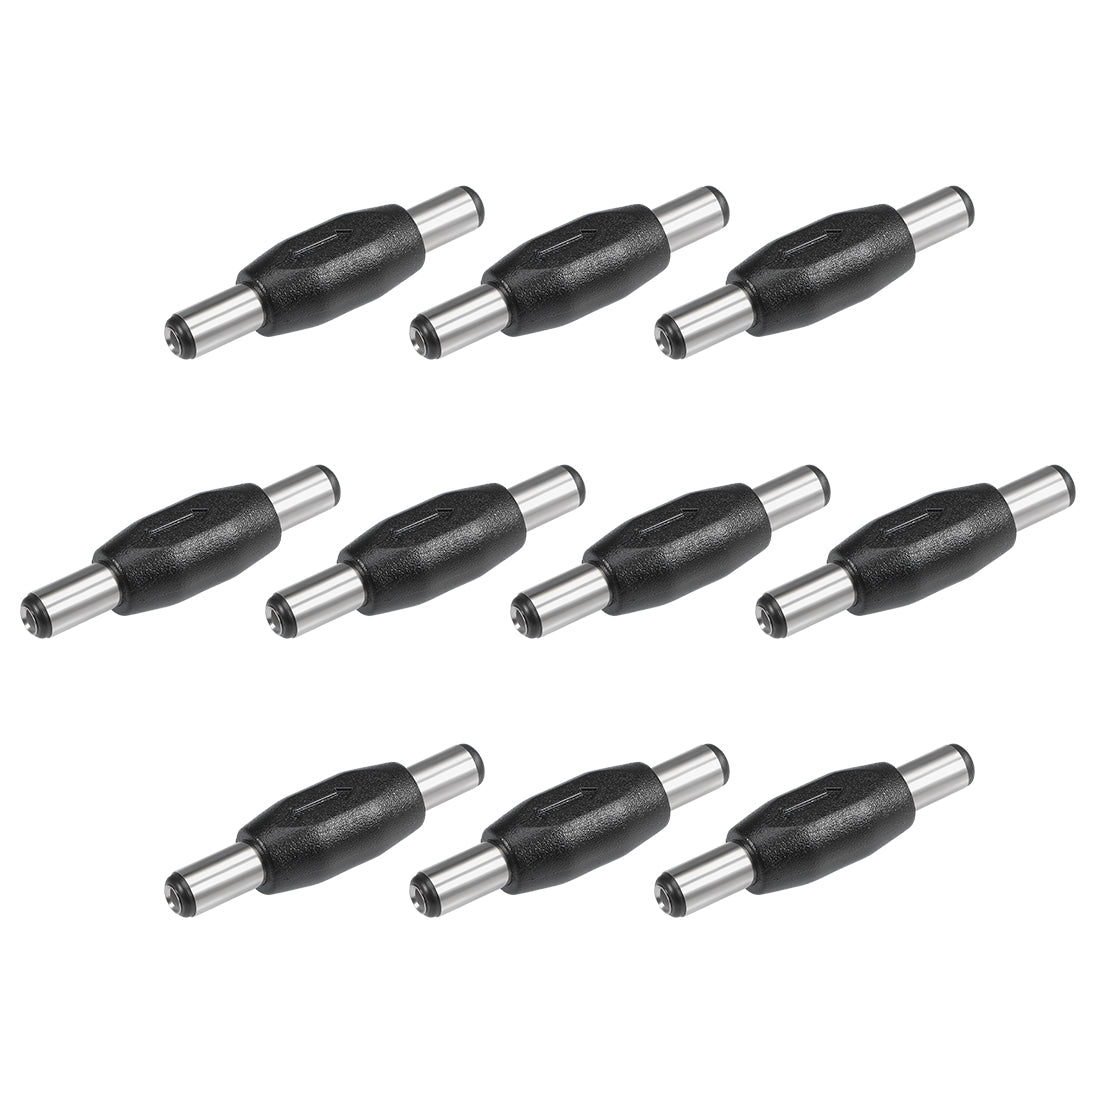 uxcell Uxcell 10Pcs DC Male to Male Connector 5.5mm x 2.1mm Power Cable Jack Adapter Black